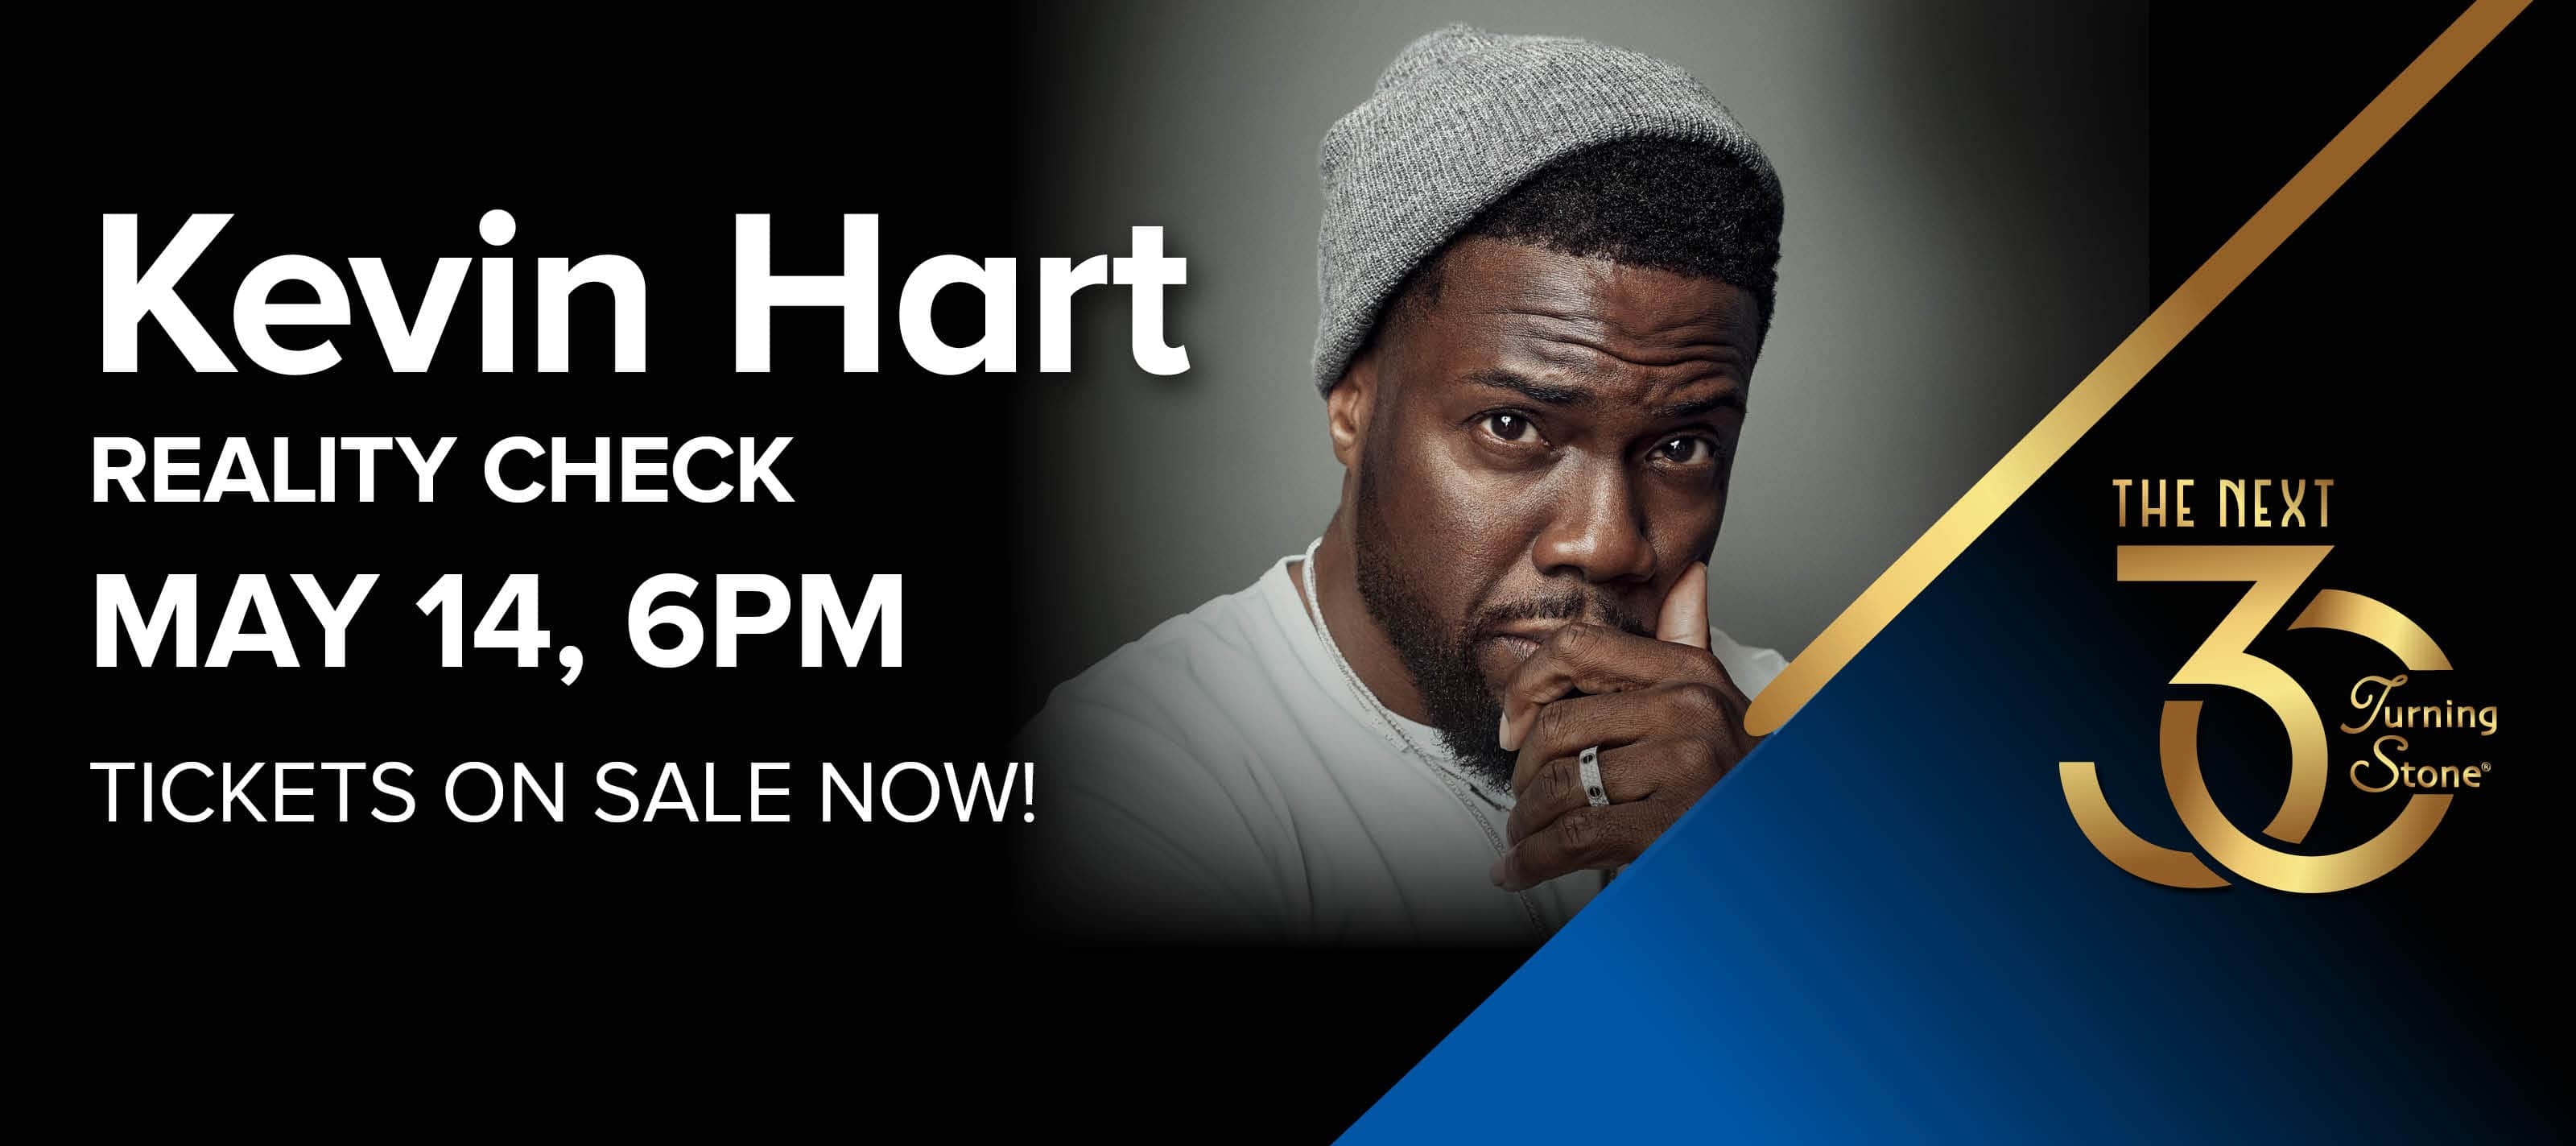 Kevin Hart Reality Check May 14 6pm Tickets On Sale Now